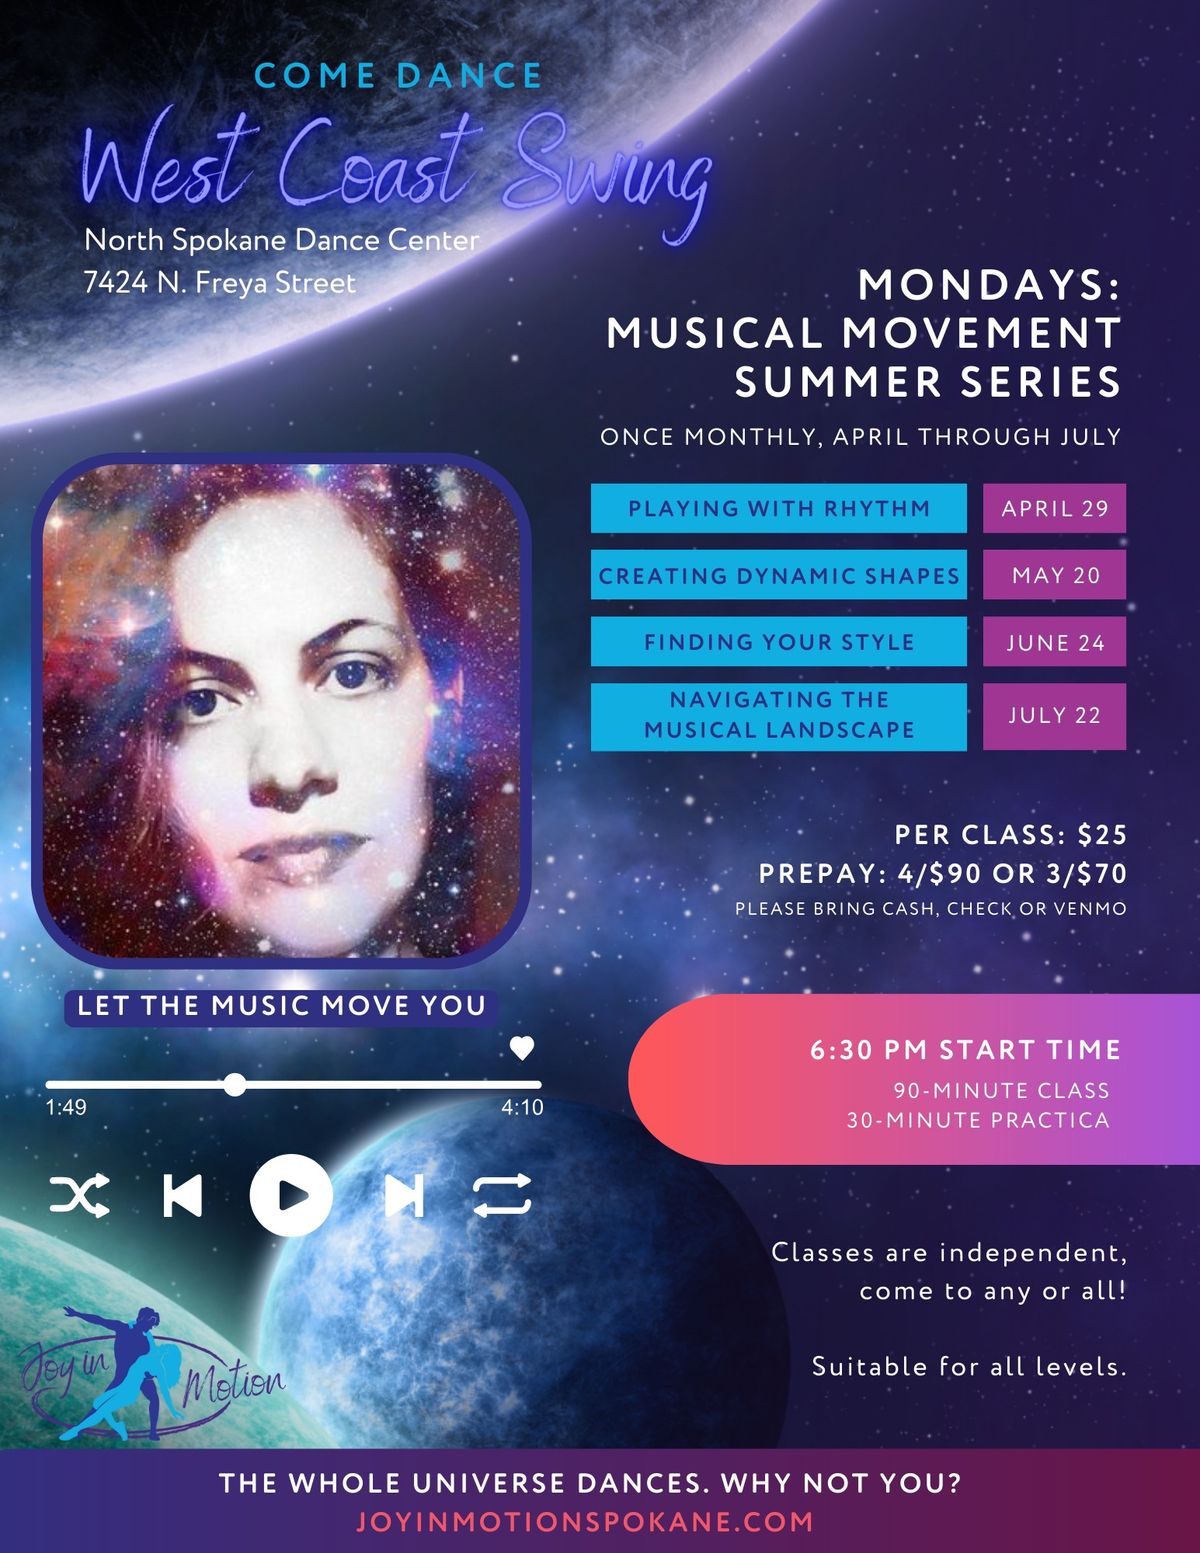 Musical Movement Summer Series: Class 2 - Creating Dynamic Shapes